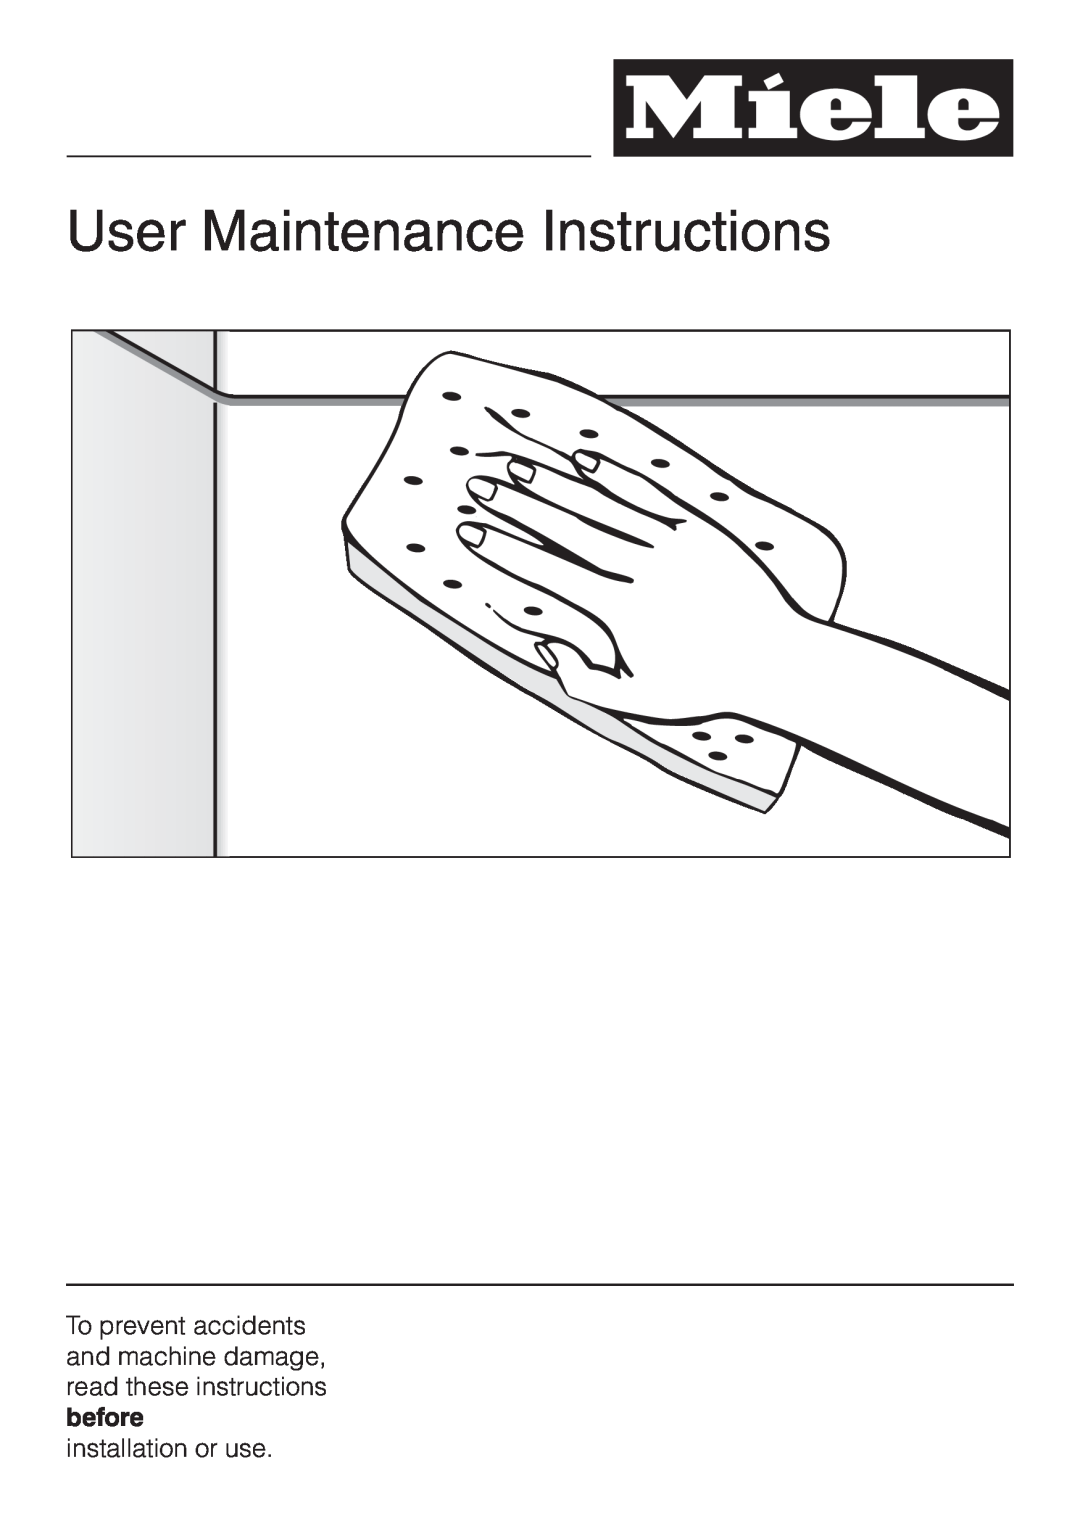 Miele G 856 SC ELITE operating instructions User Maintenance Instructions, installation or use 